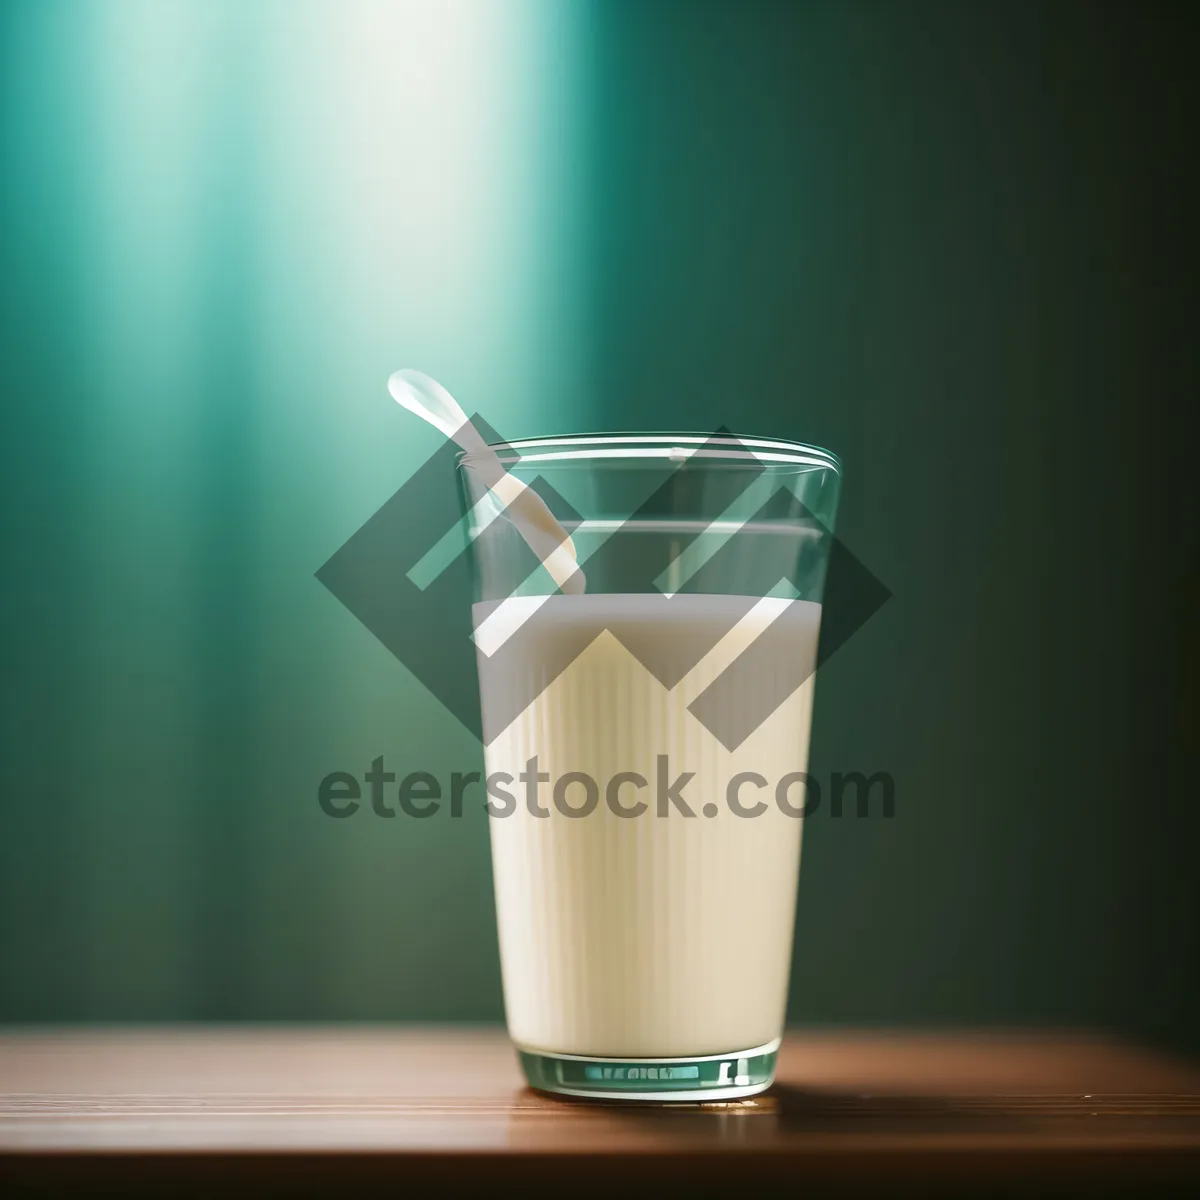 Picture of Morning Milk in Stylish Coffee Mug